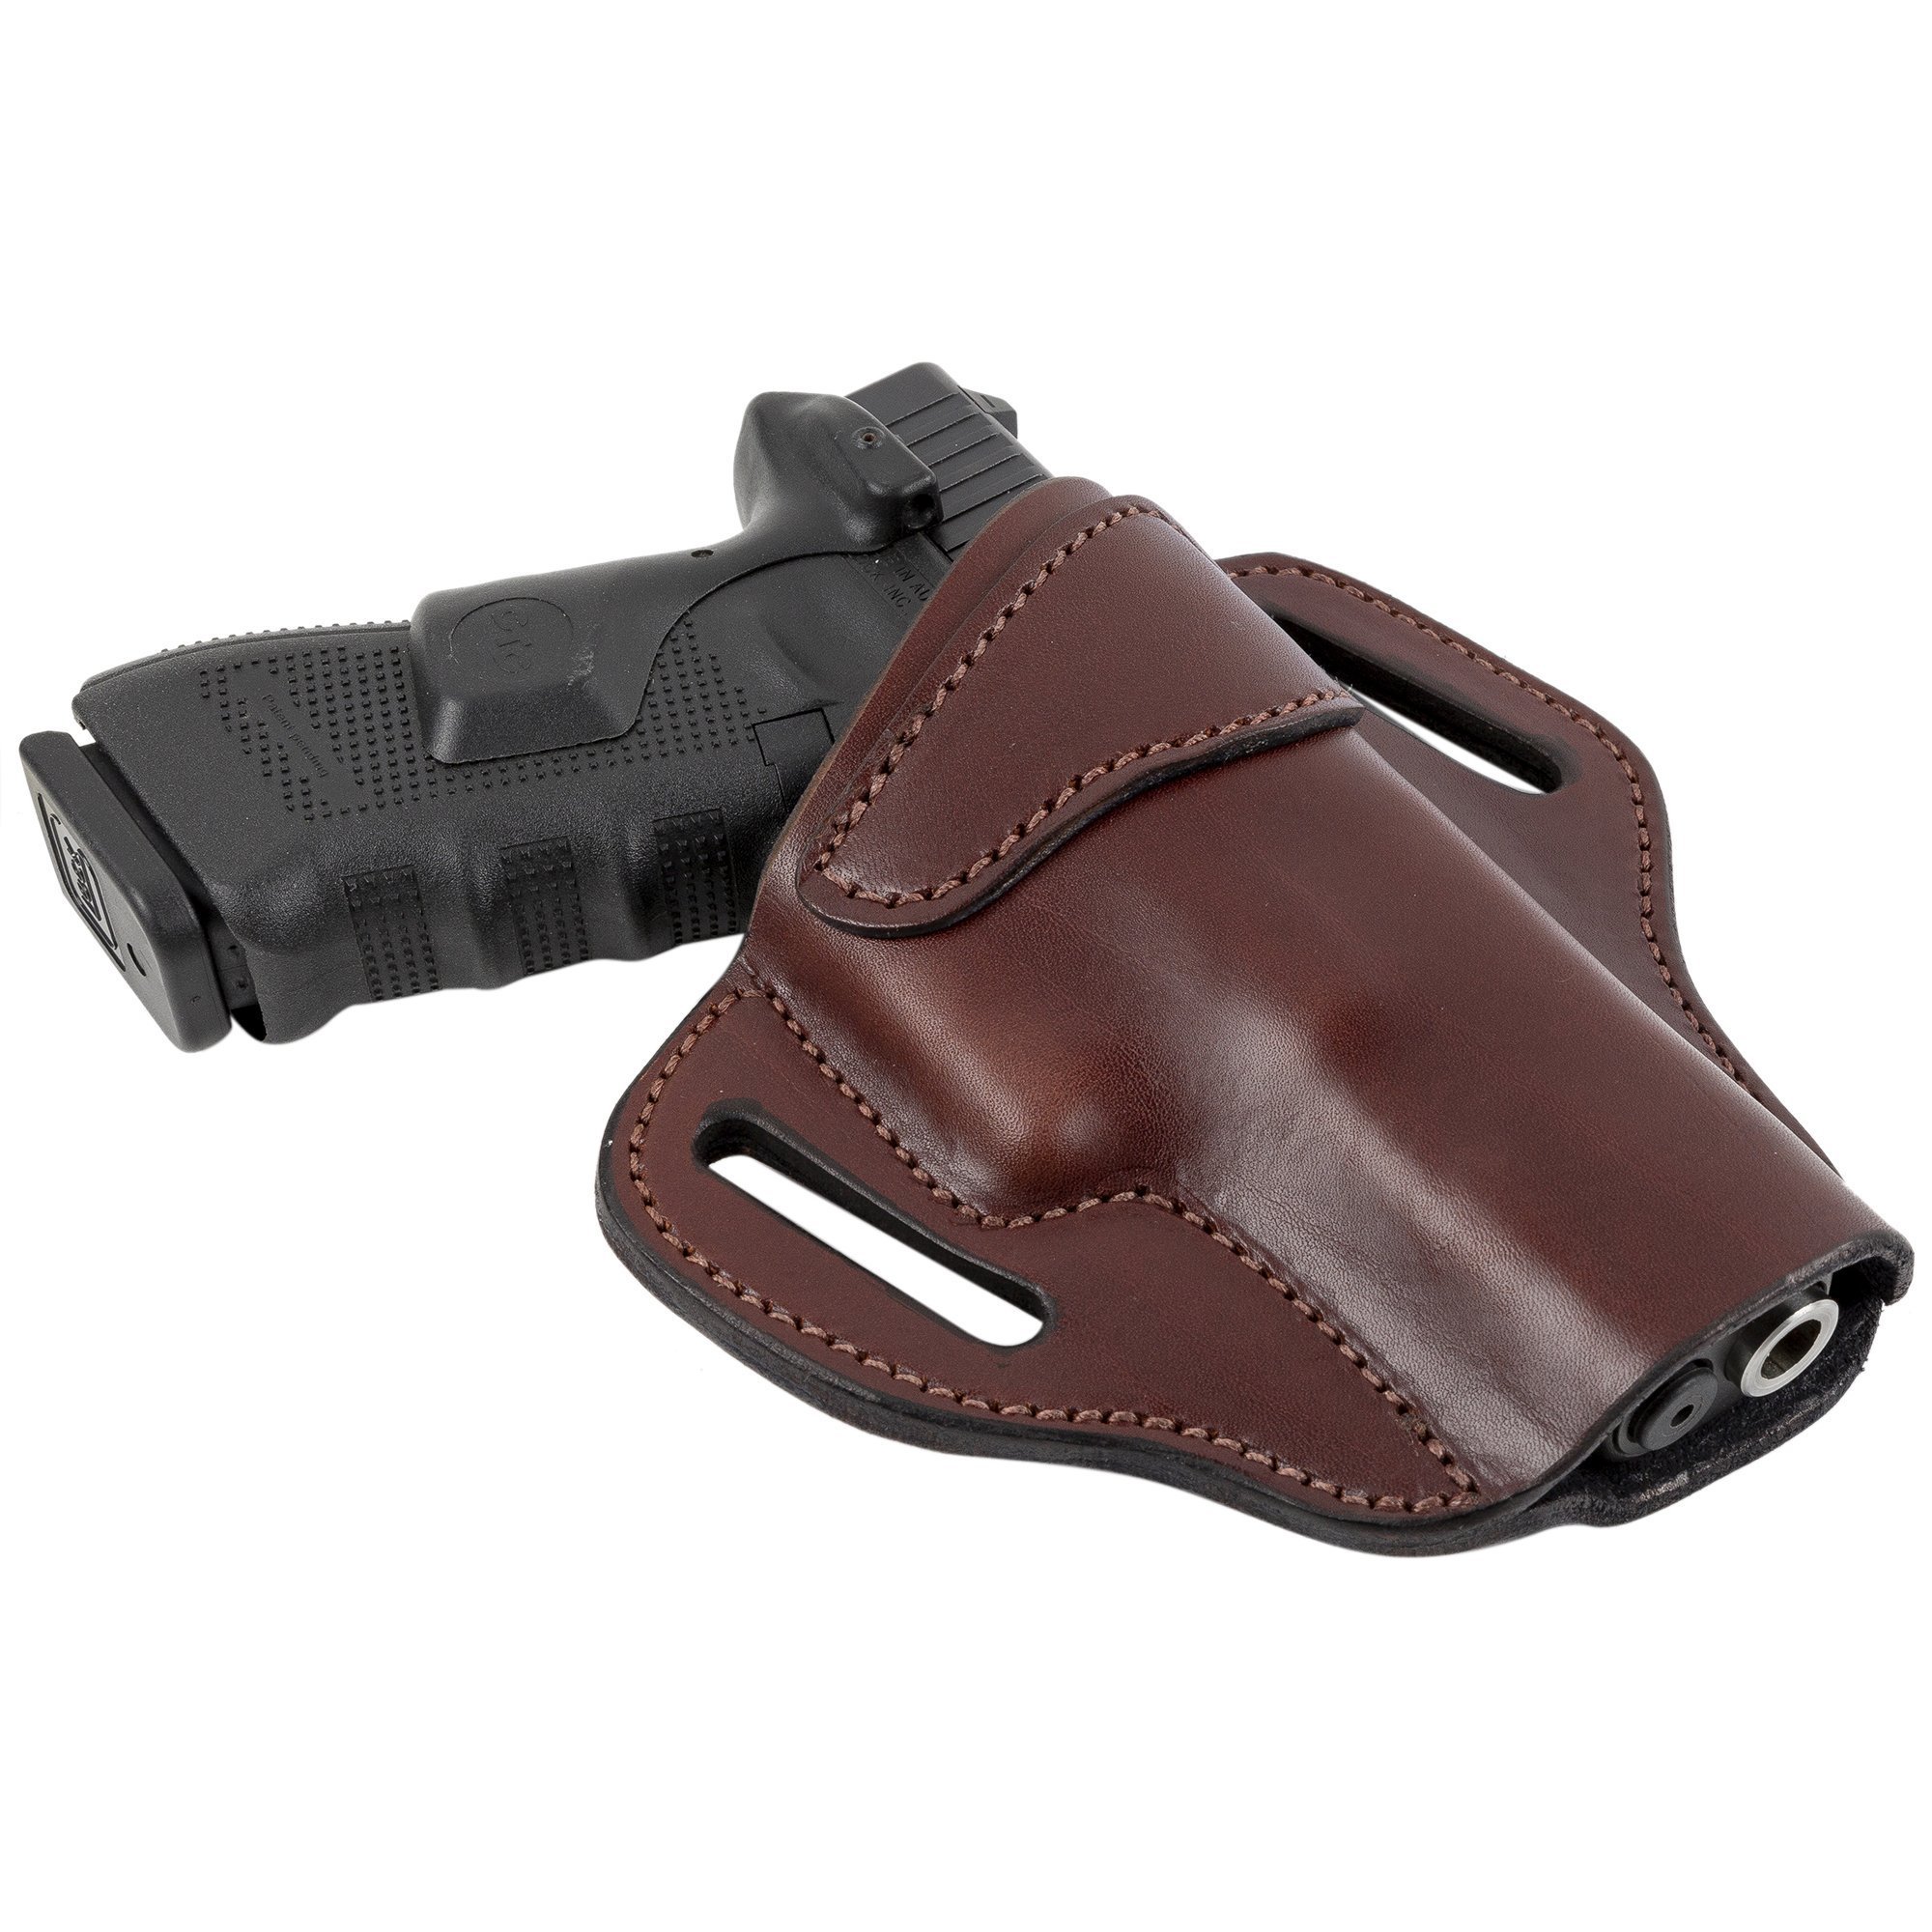 OPEN TOP BELT LEATHER HOLSTER FITS SPRINGFIELD XD .40 OWB HOLSTER W/ 3 SLOT. 